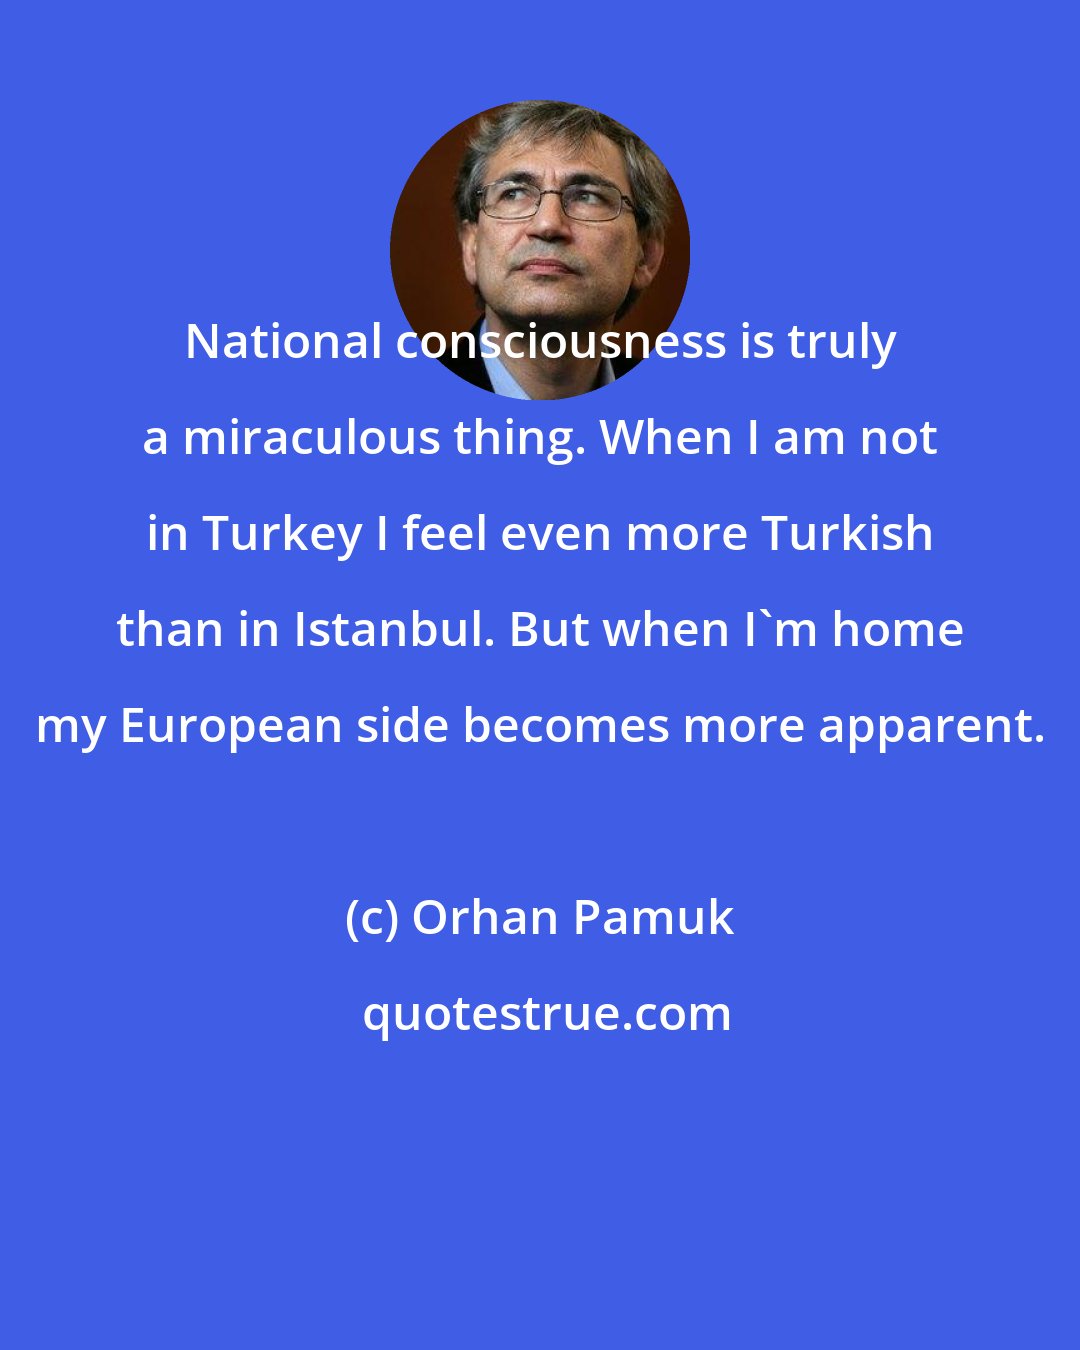 Orhan Pamuk: National consciousness is truly a miraculous thing. When I am not in Turkey I feel even more Turkish than in Istanbul. But when I'm home my European side becomes more apparent.